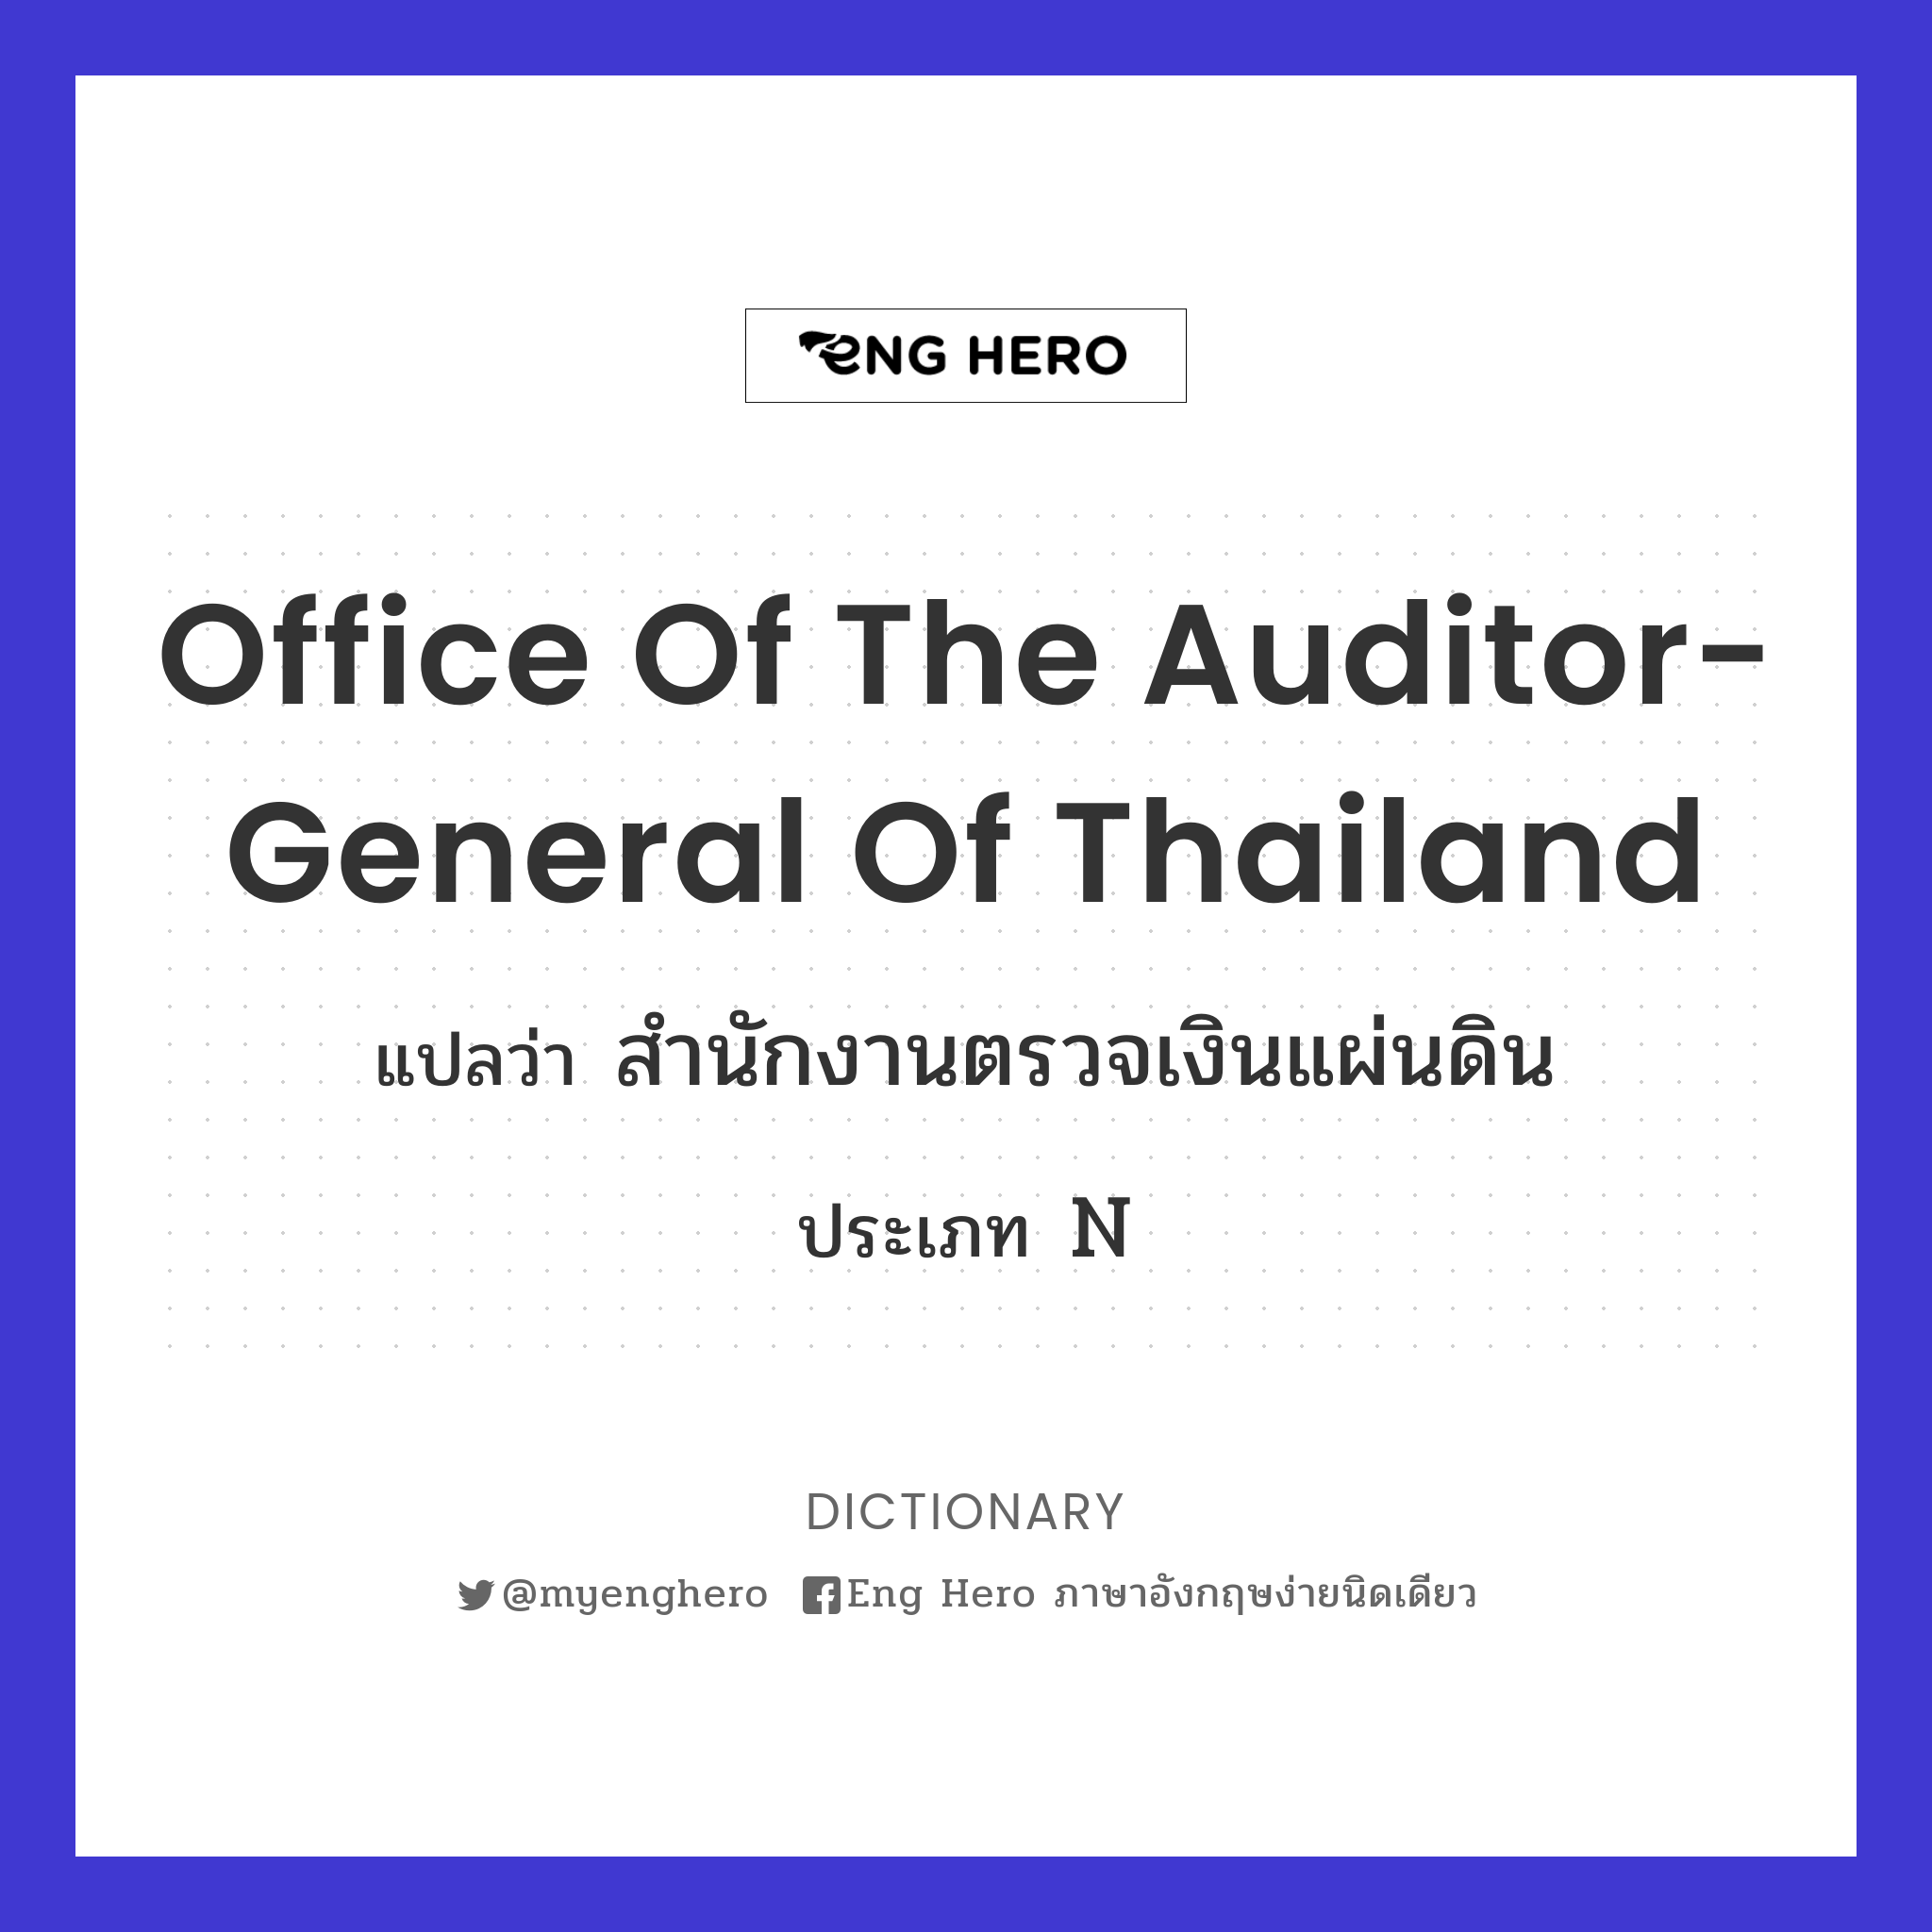 Office of the Auditor-General of Thailand